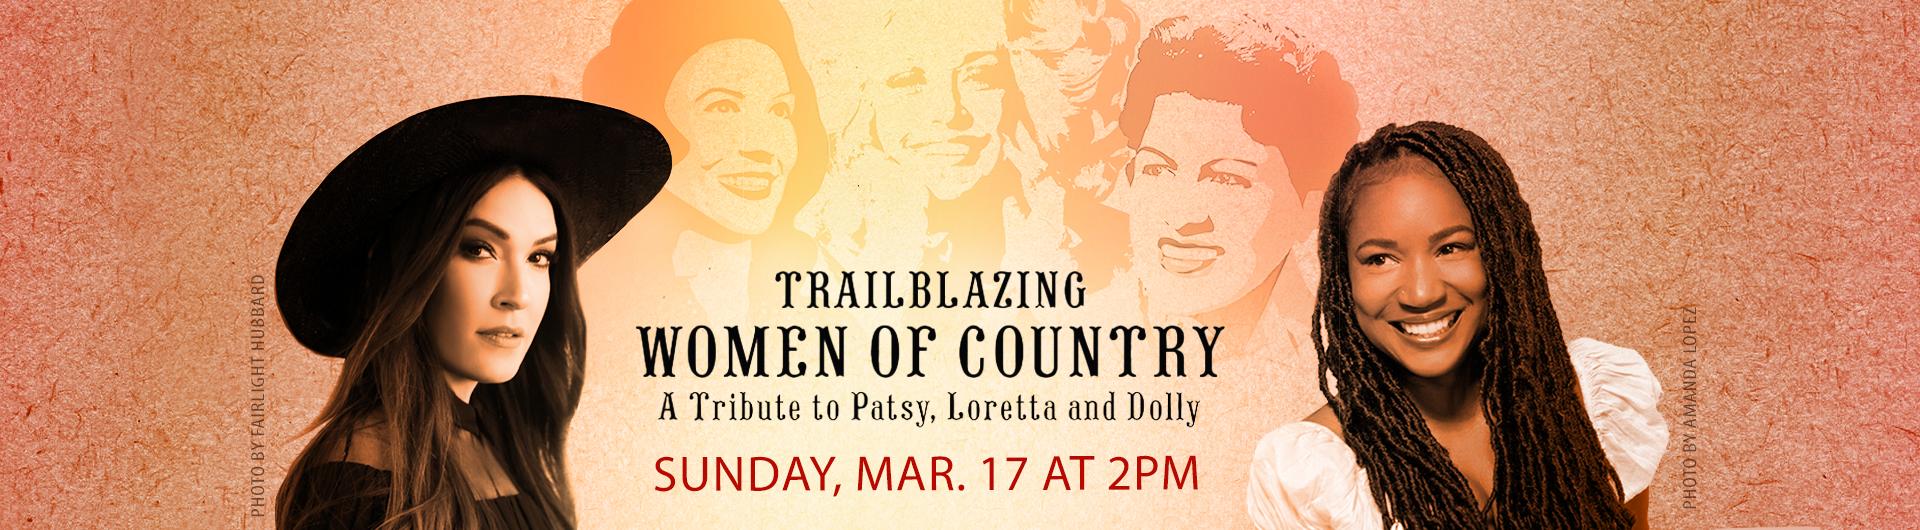 An illustration of Patsy Cline, Loretta Lynn and Dolly Parton as well as photographs of Mike Marks and Kristina Train and the headline TRAILBLAZING WOMEN OF COUNTRY